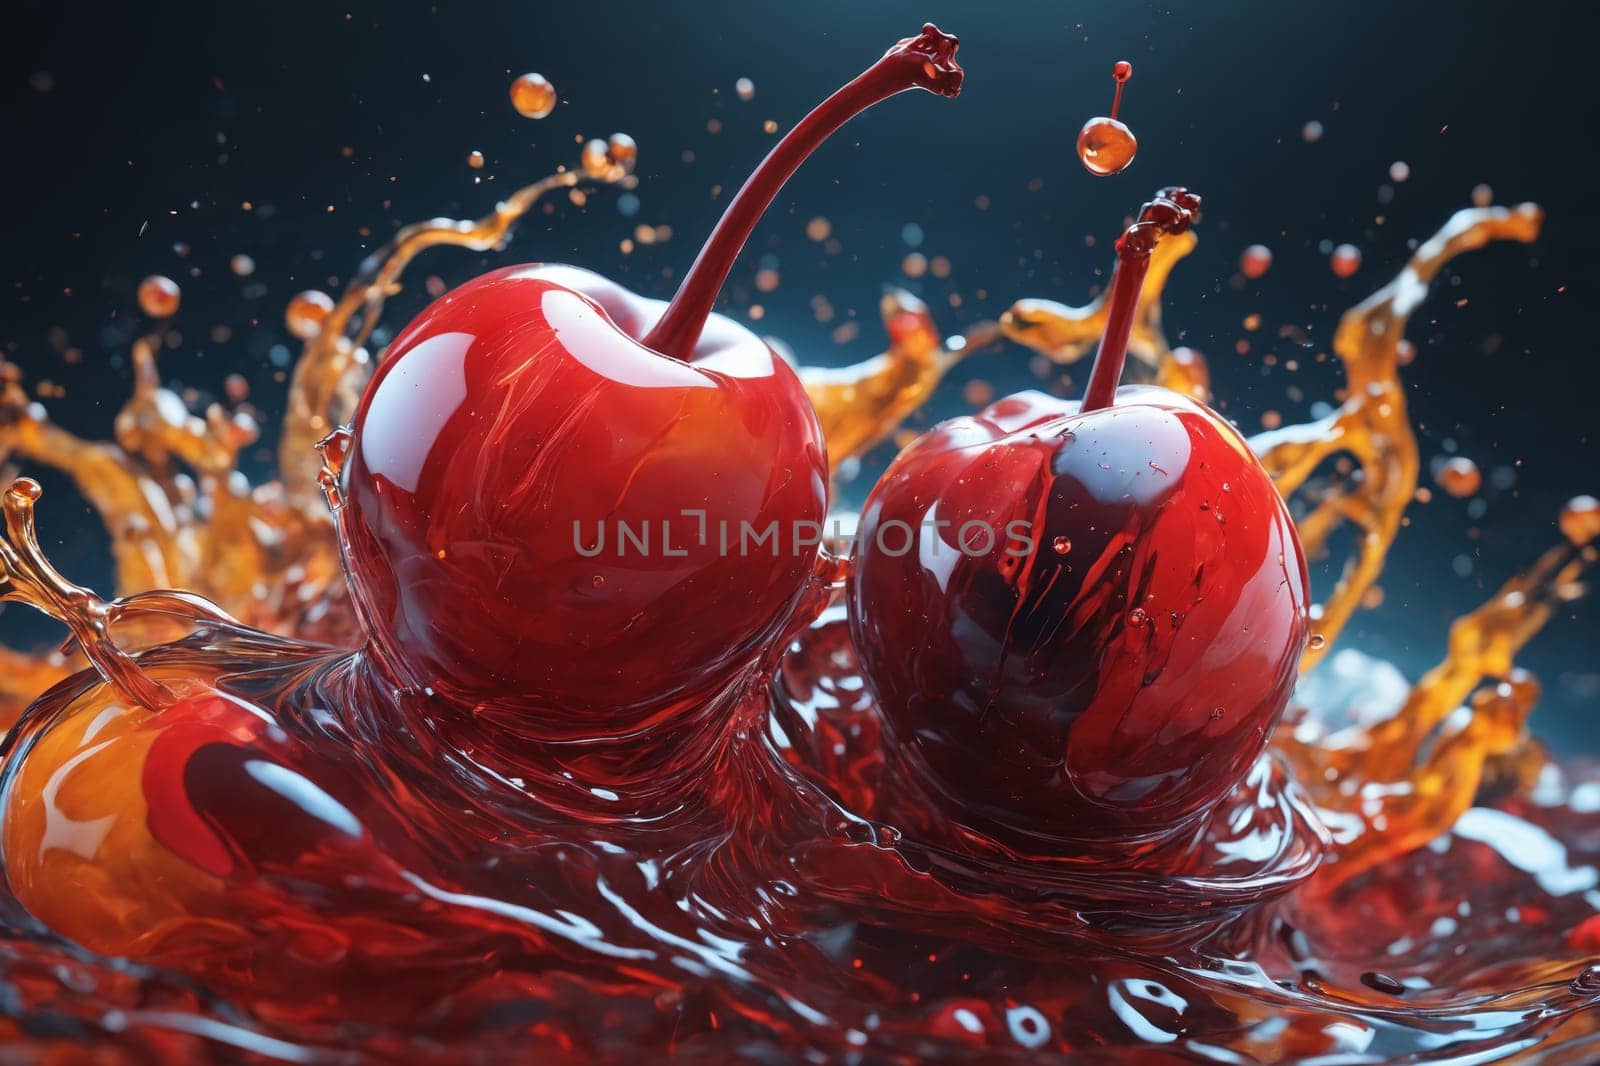 Fruity Eruption: Cherries and Oranges Create a Splash Symphony by Andre1ns